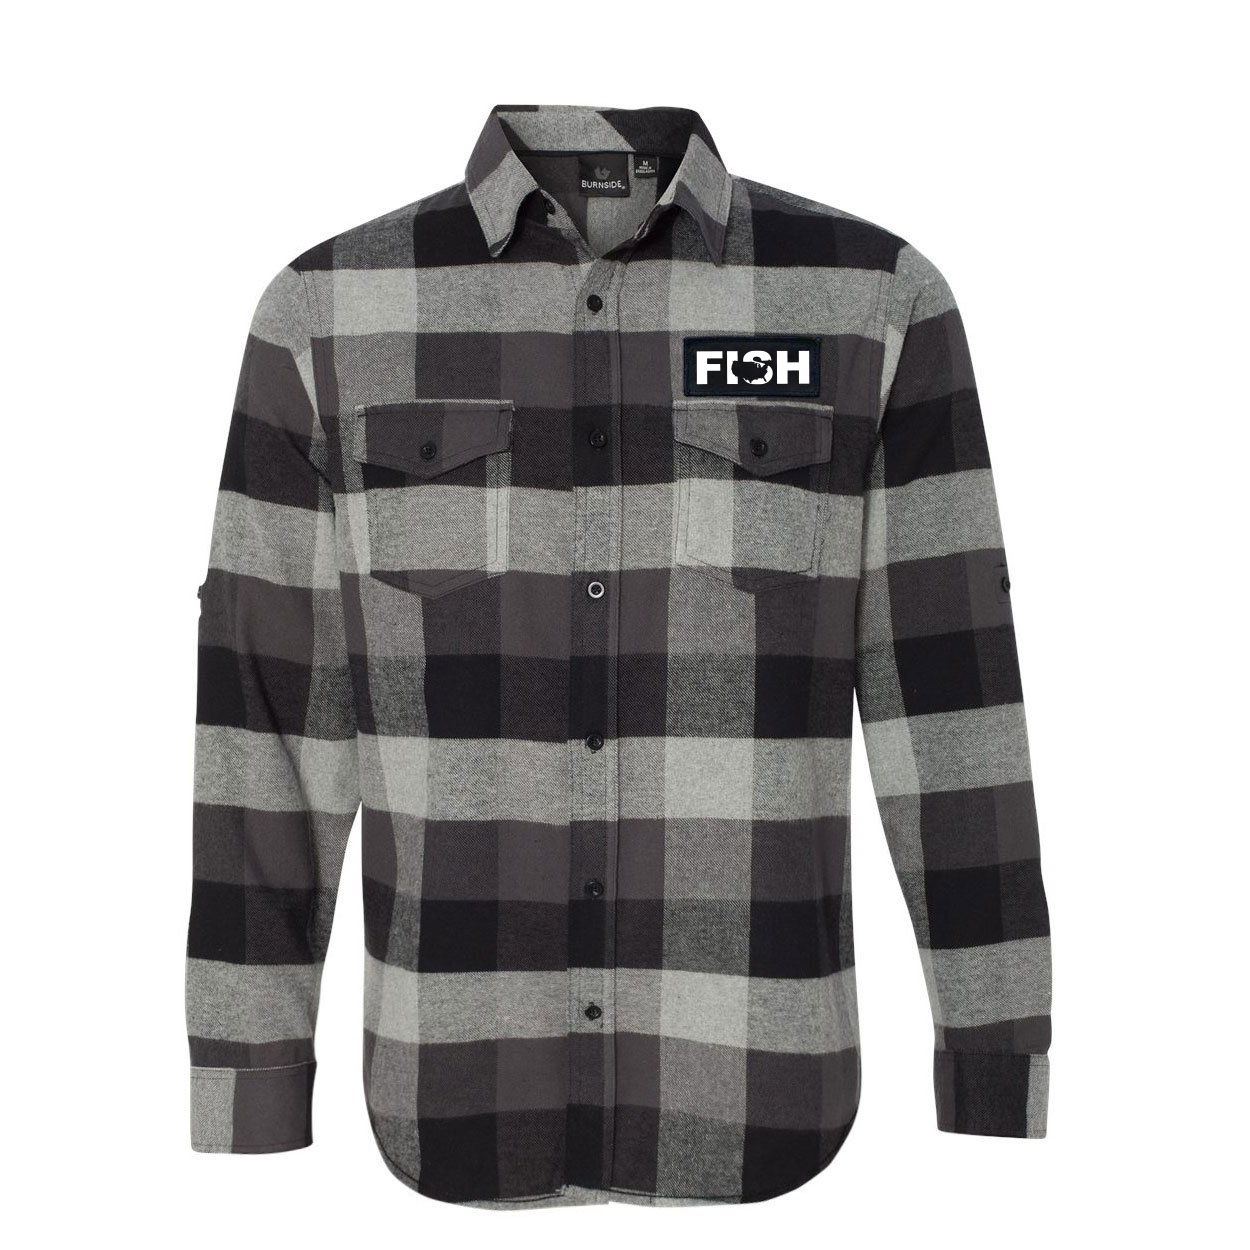 Fish United States Classic Unisex Long Sleeve Woven Patch Flannel Shirt Black/Gray (White Logo)